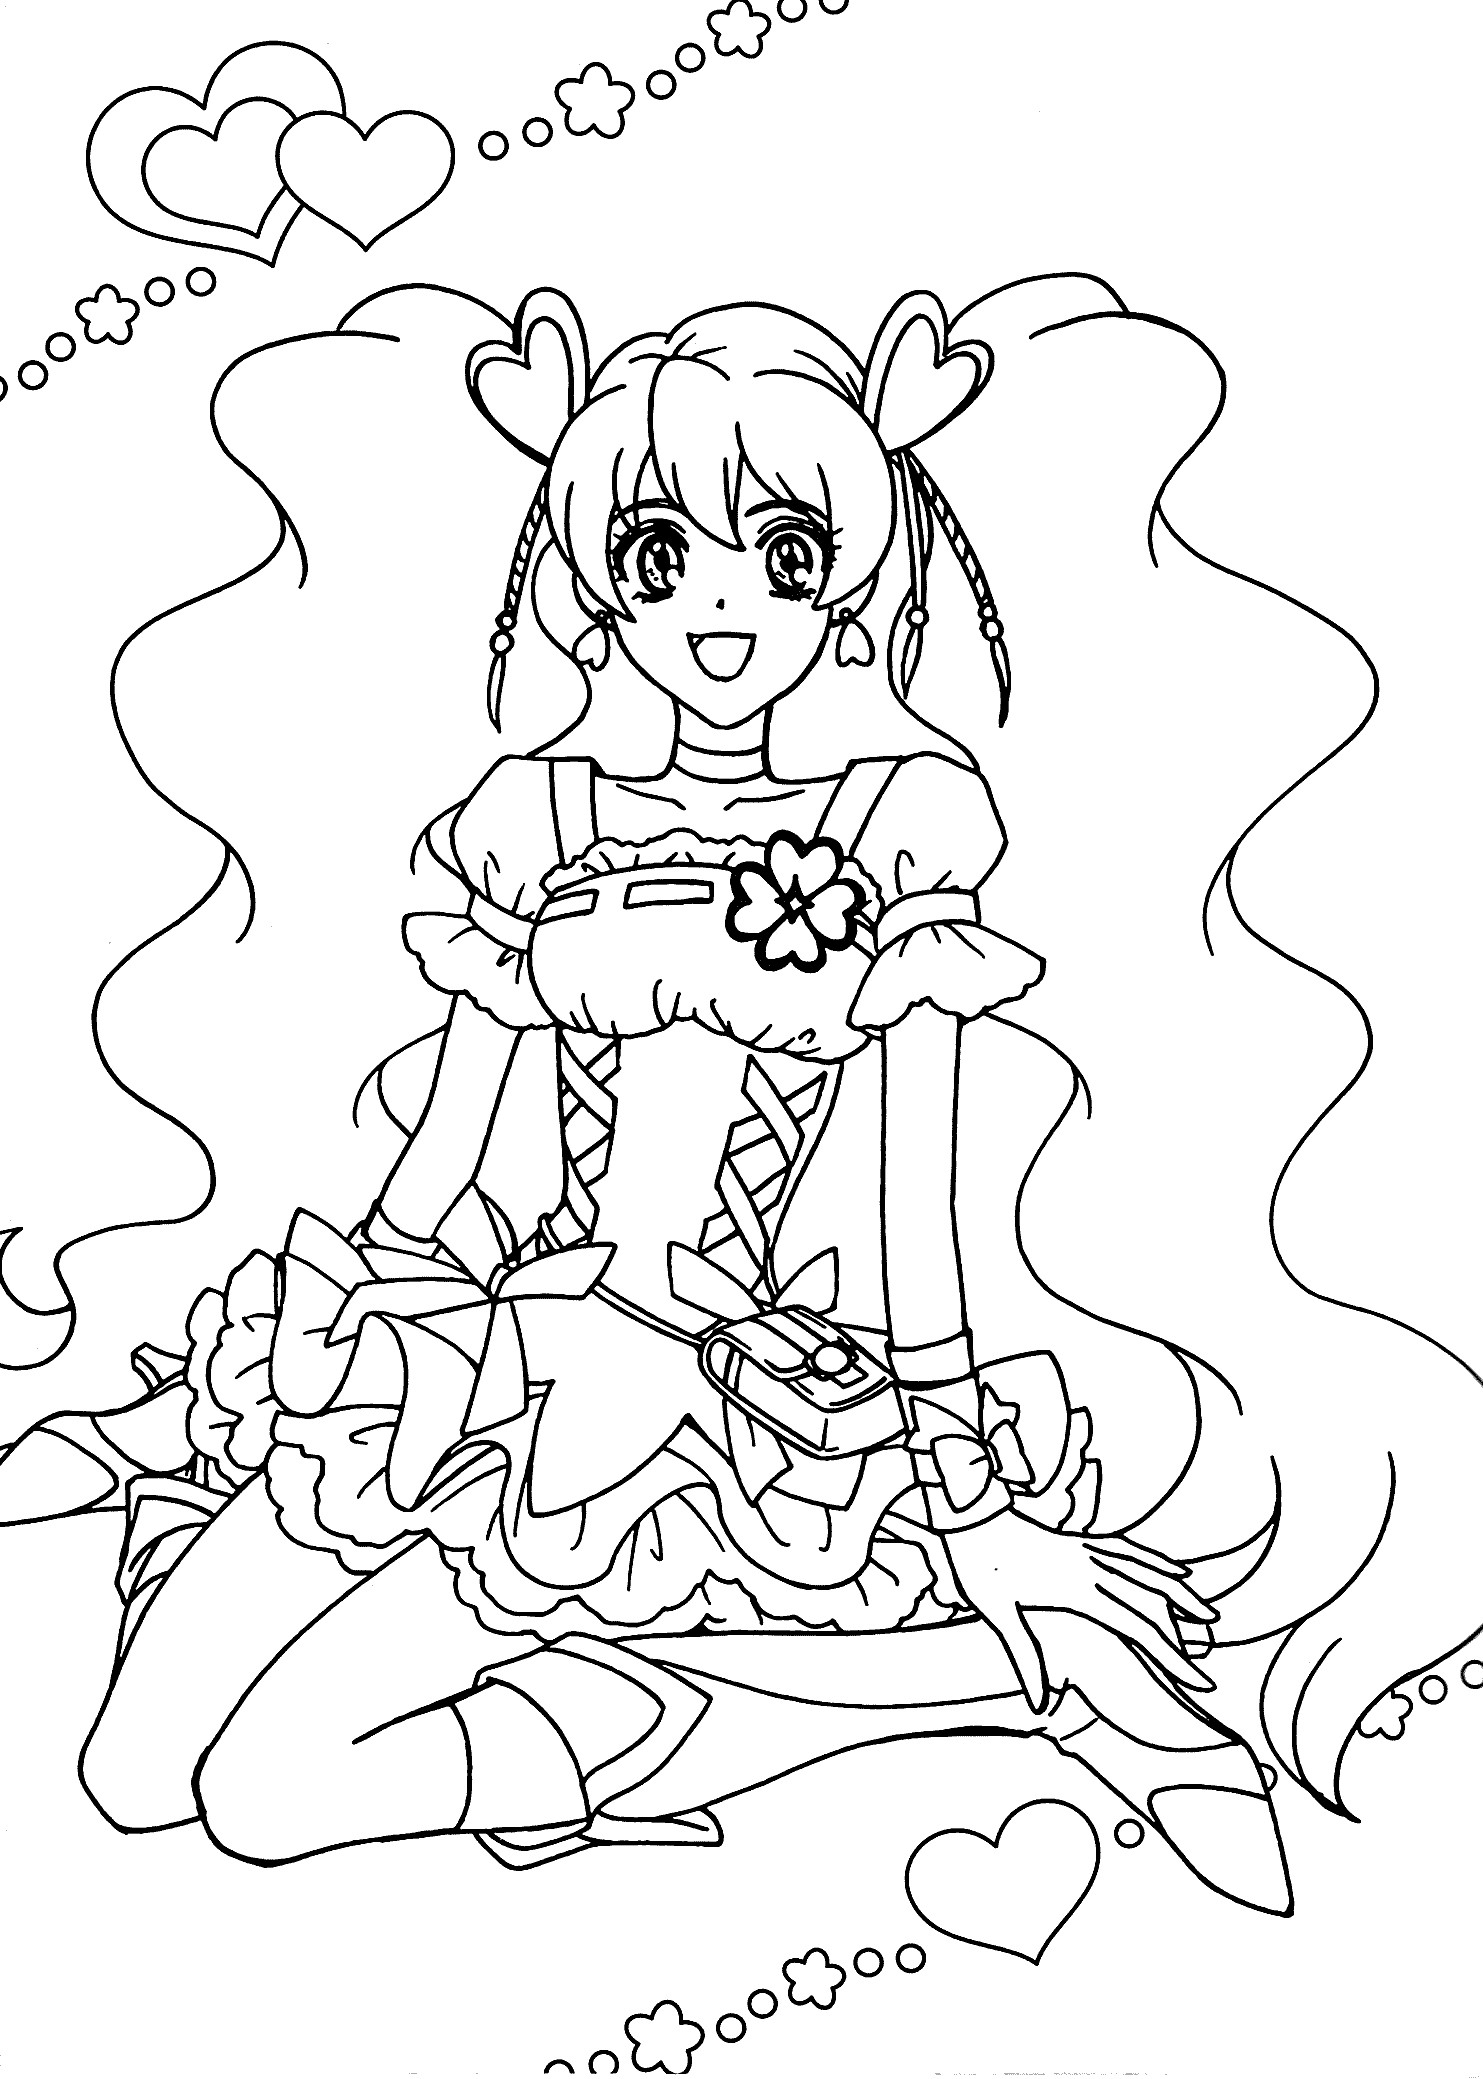 Free Anime Coloring Pages at GetColorings.com | Free printable